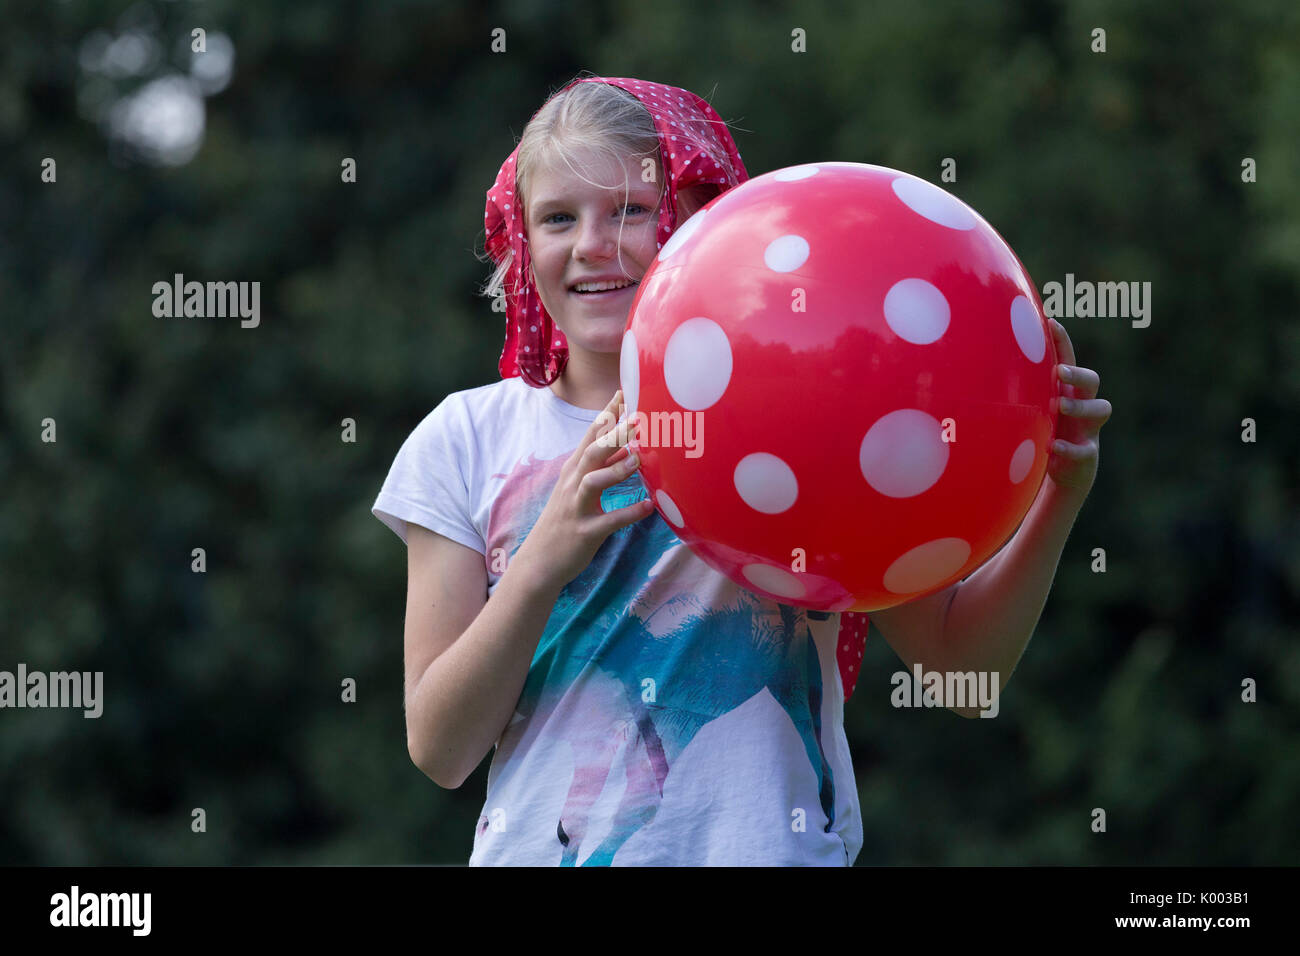 portrait of a young girl with a big ball Stock Photo